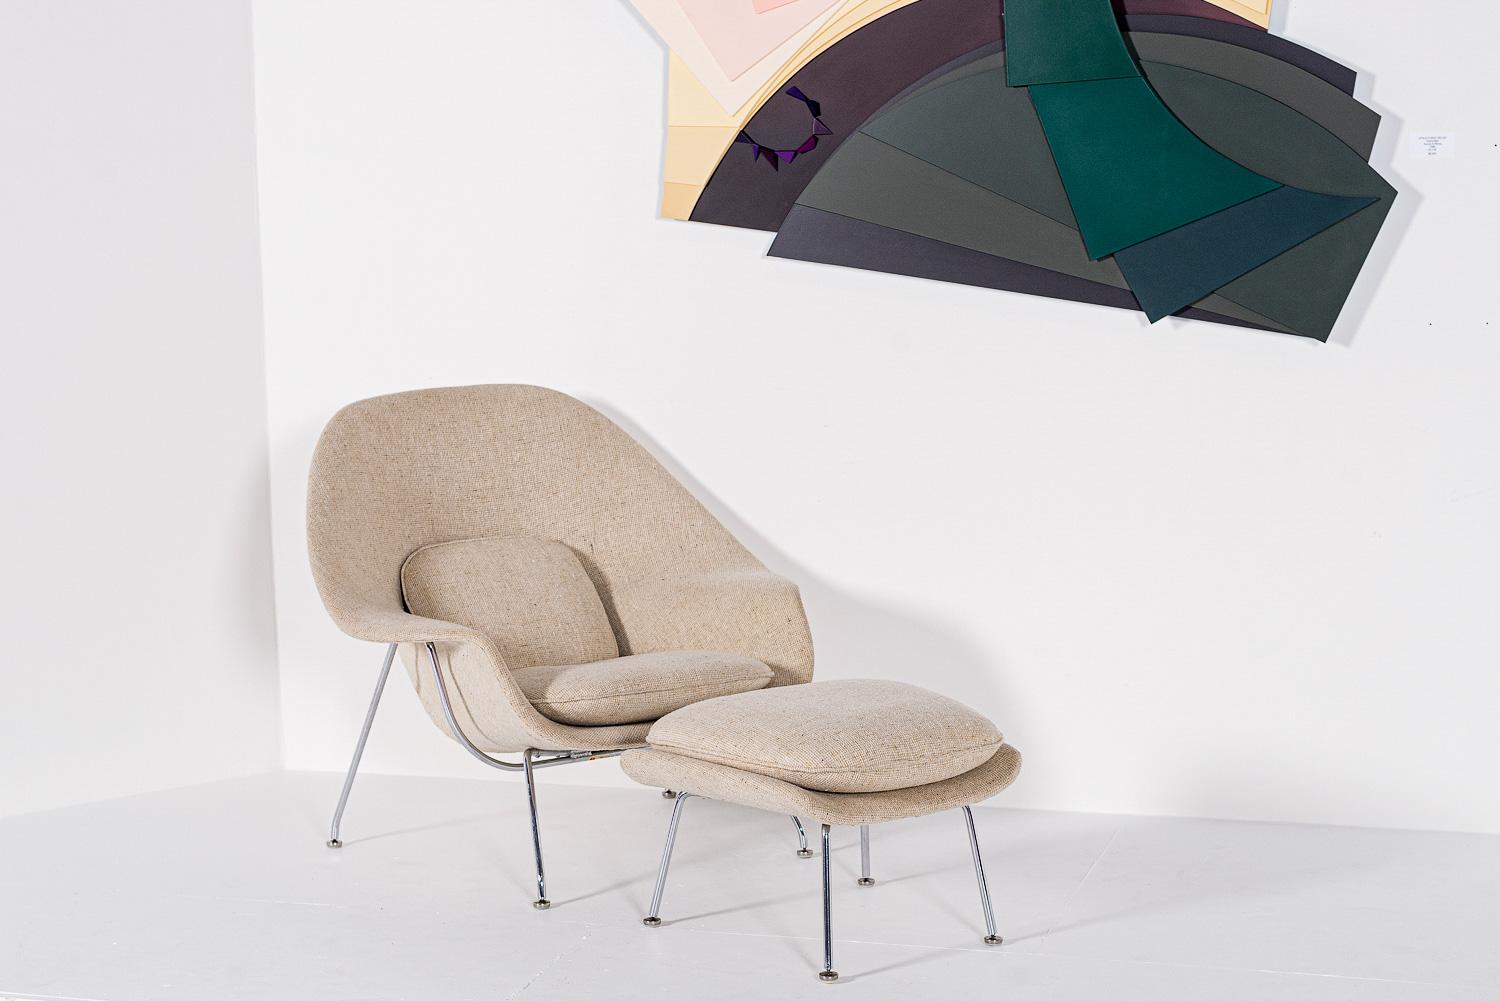 The mid century classic modern Saarinen for Knoll Womb lounge chair and ottoman was designed by Eero Saarinen in 1946 in response to Florence Knoll's request for 'a chair that was like a basket full of pillows - something she could really curl up